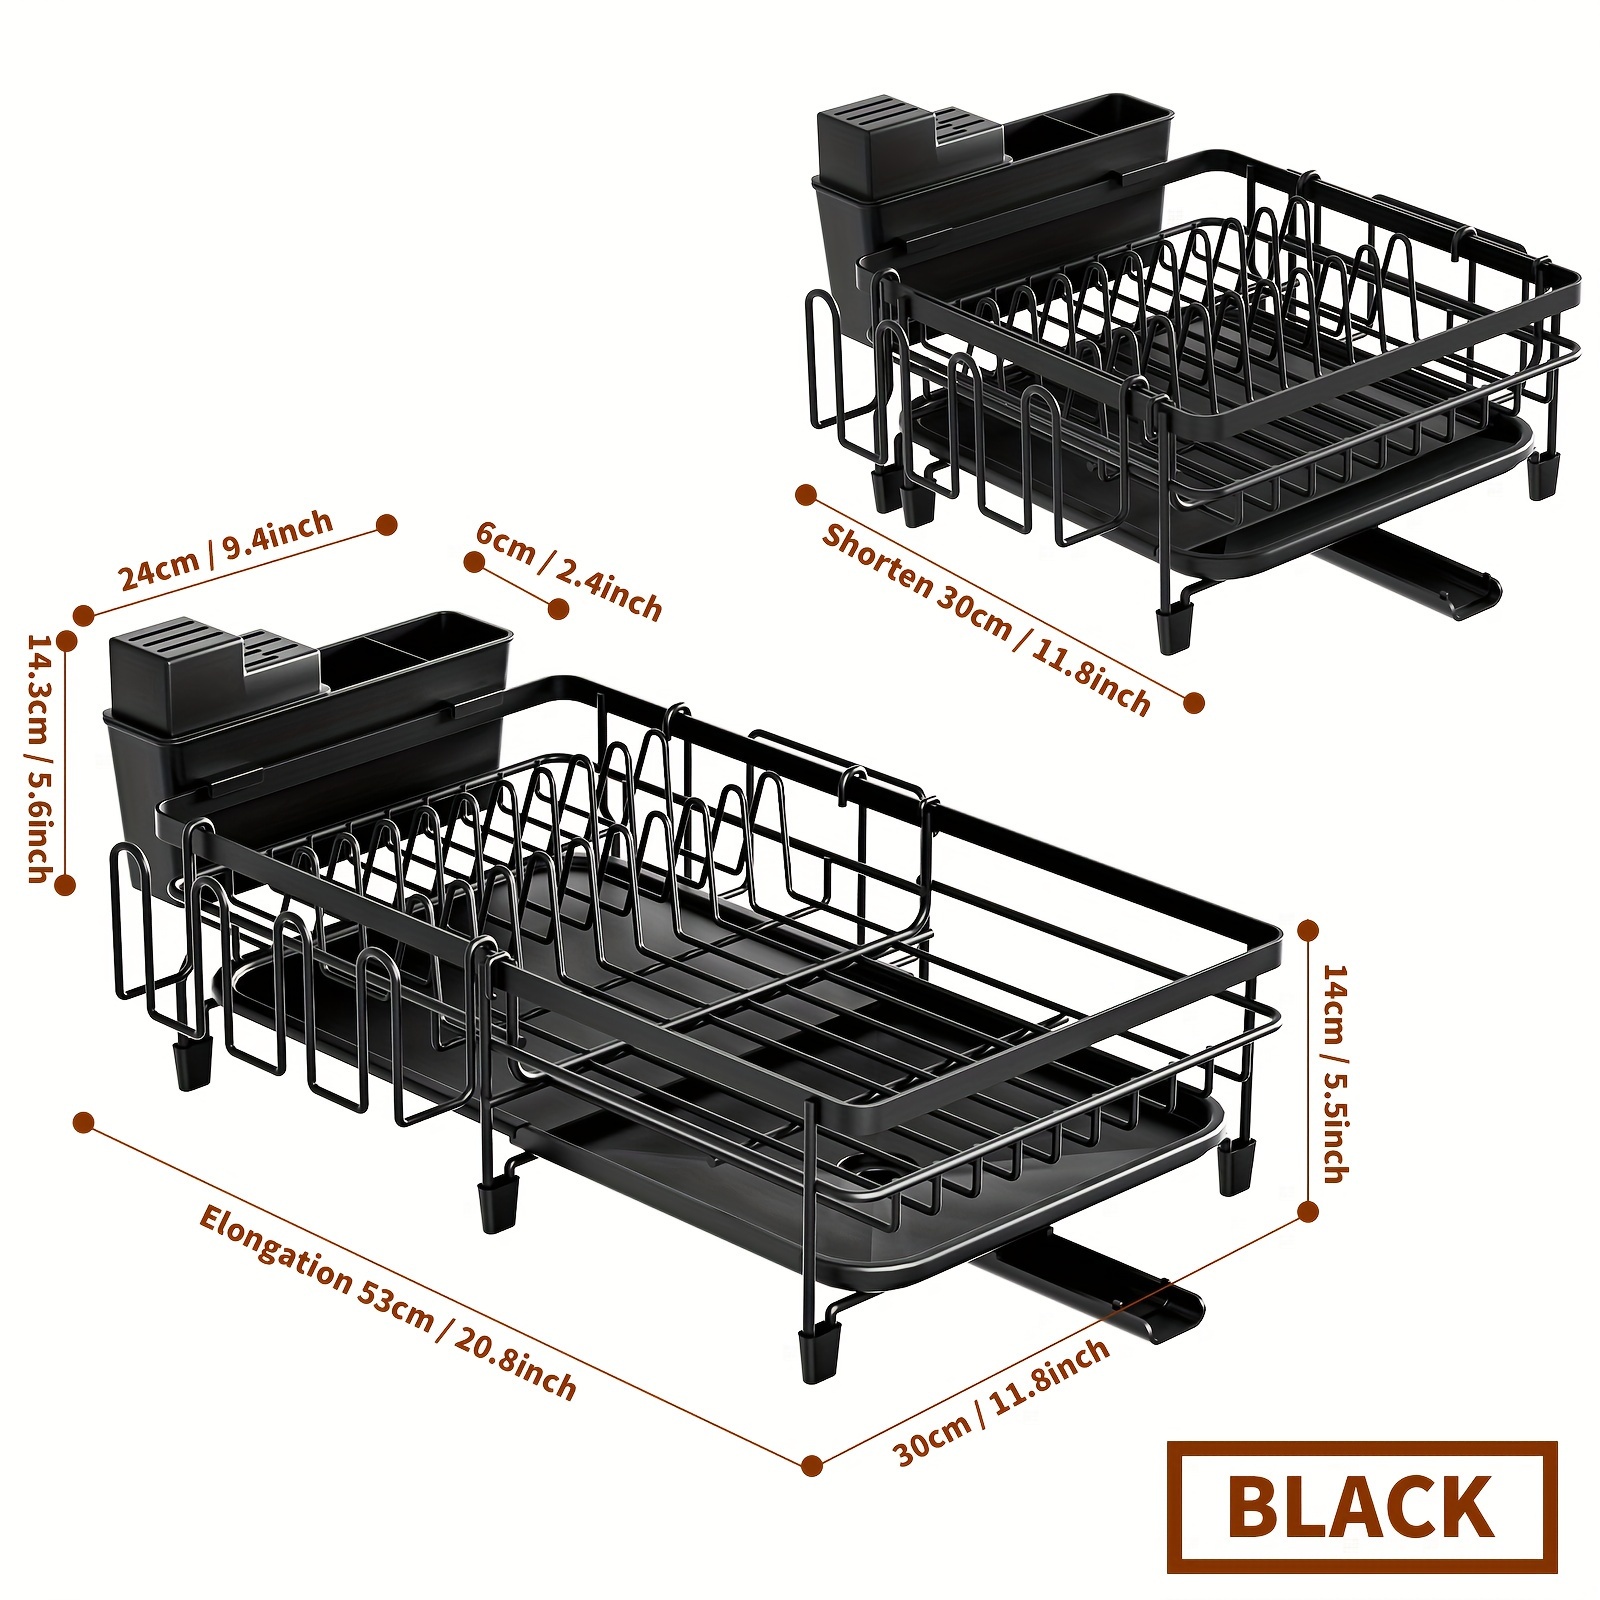 Sabatier Expandable Stainless Steel Dish Rack, 30-Inch, Black